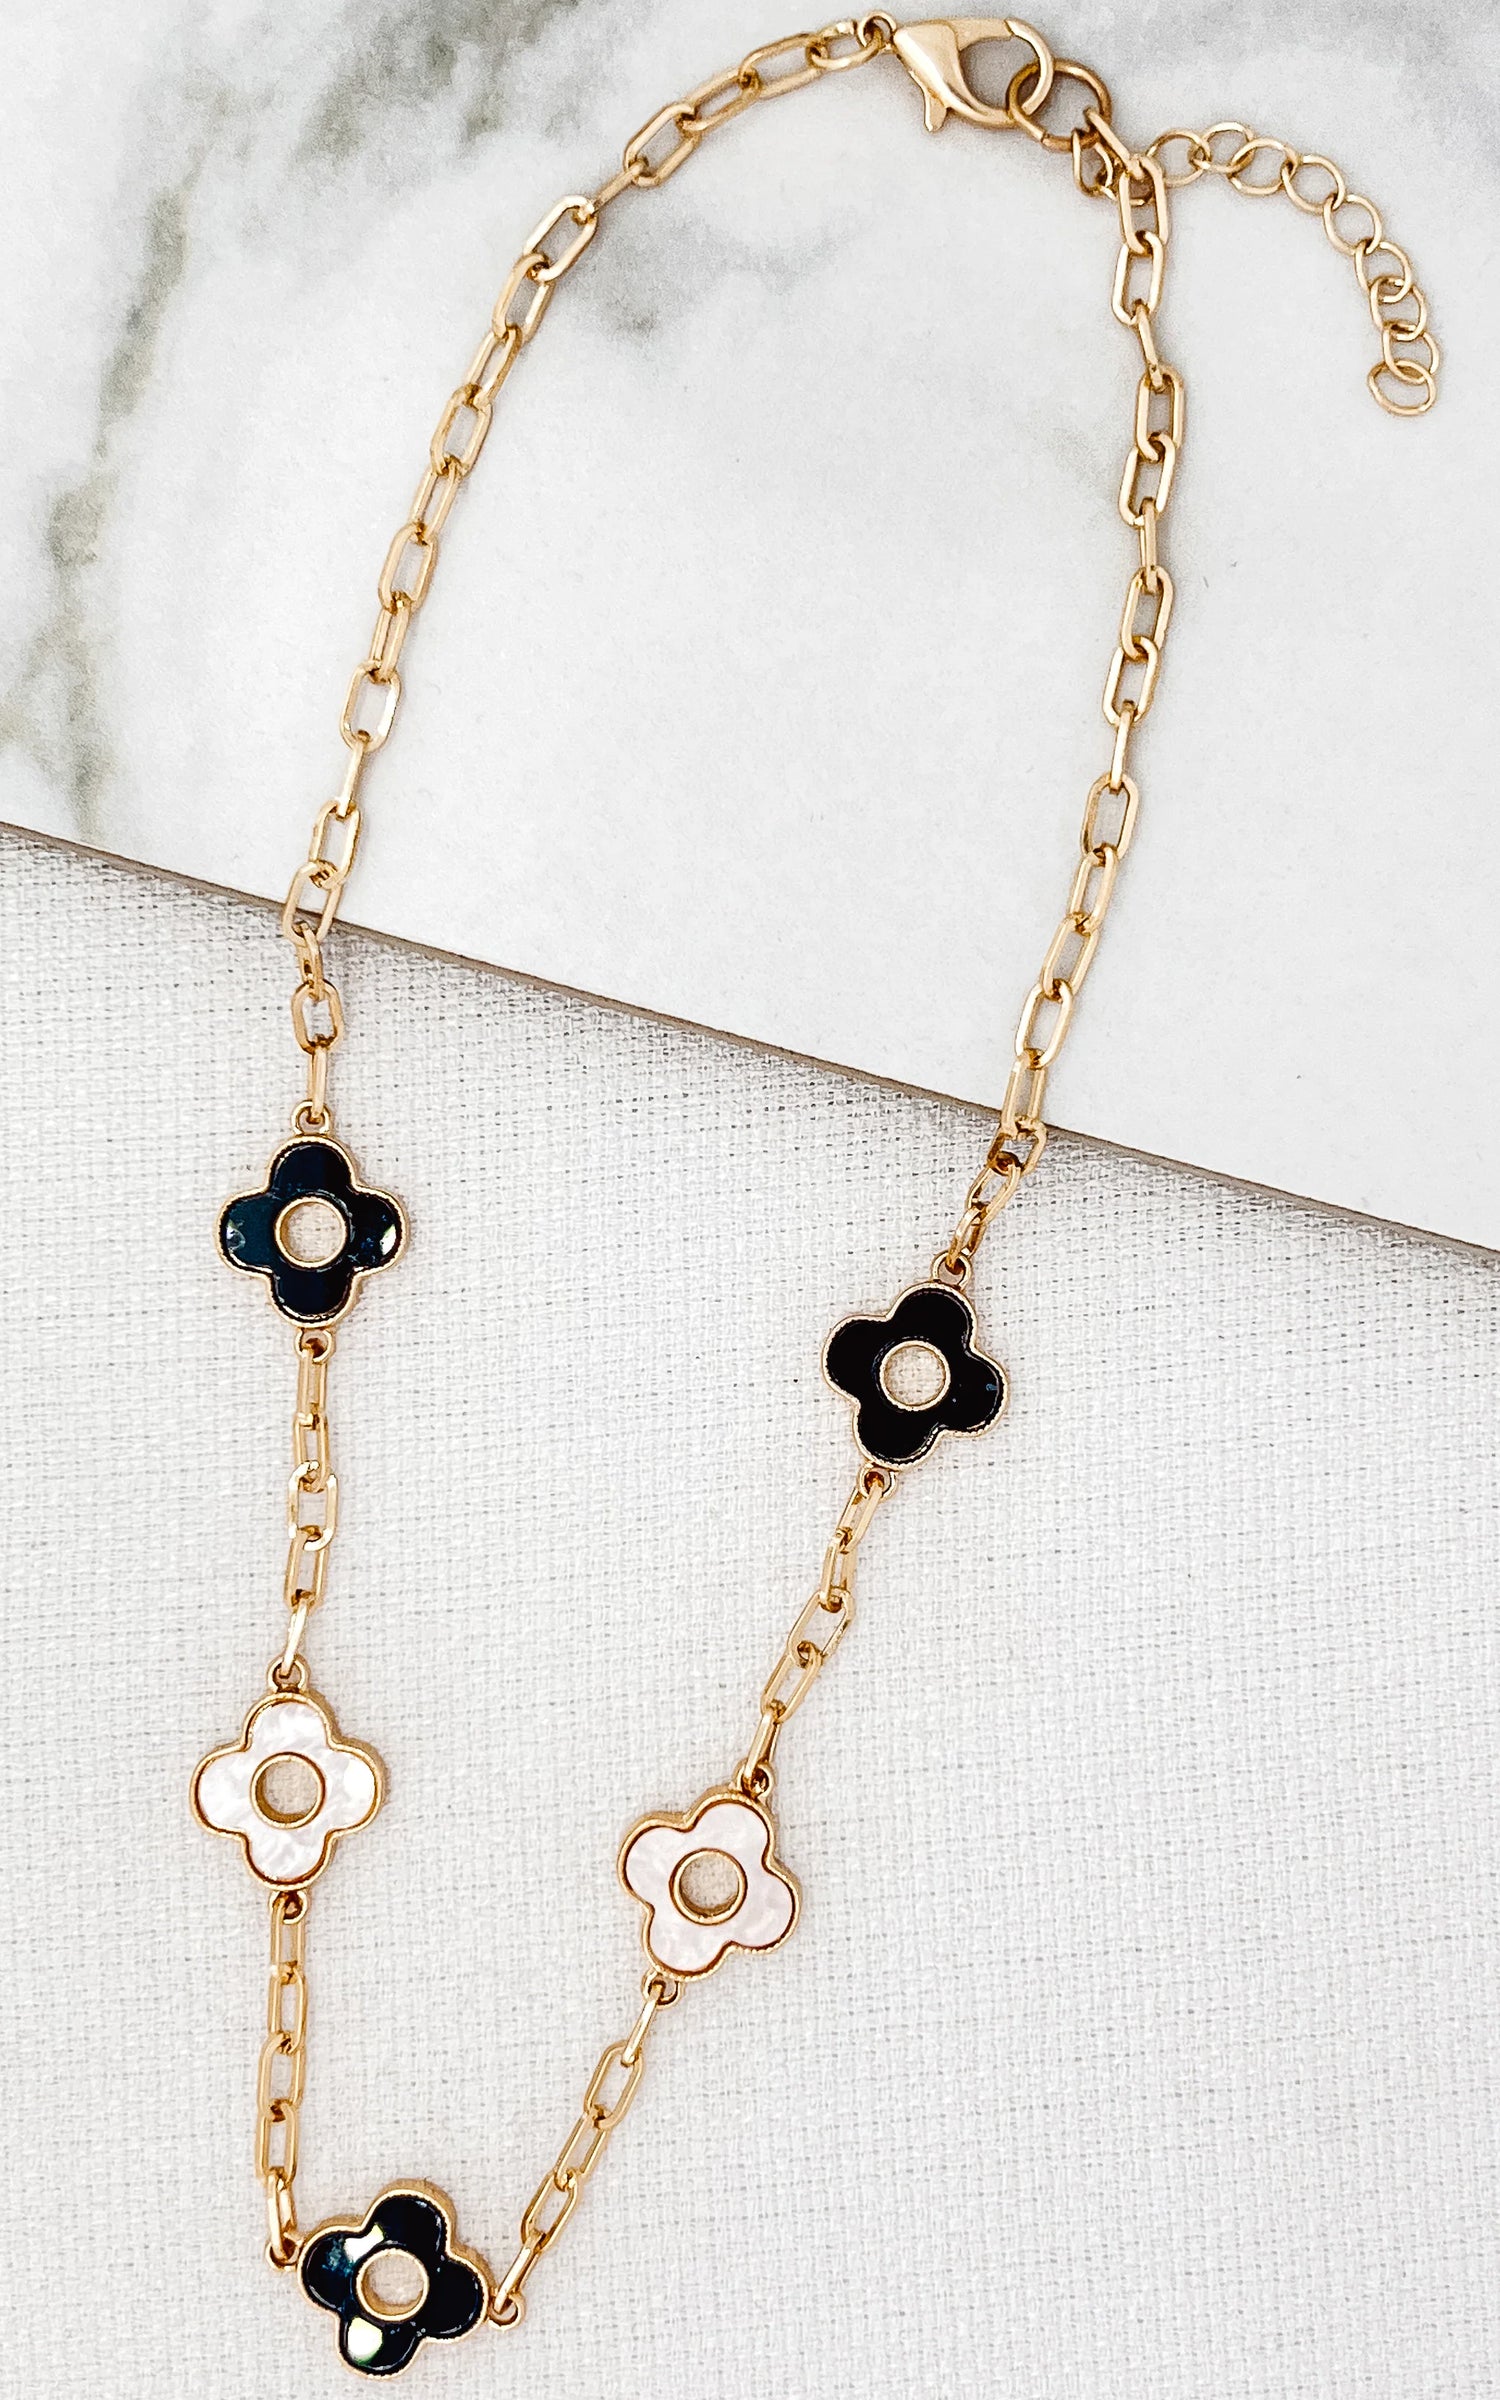 Short Gold Necklace With Black And White Fluers